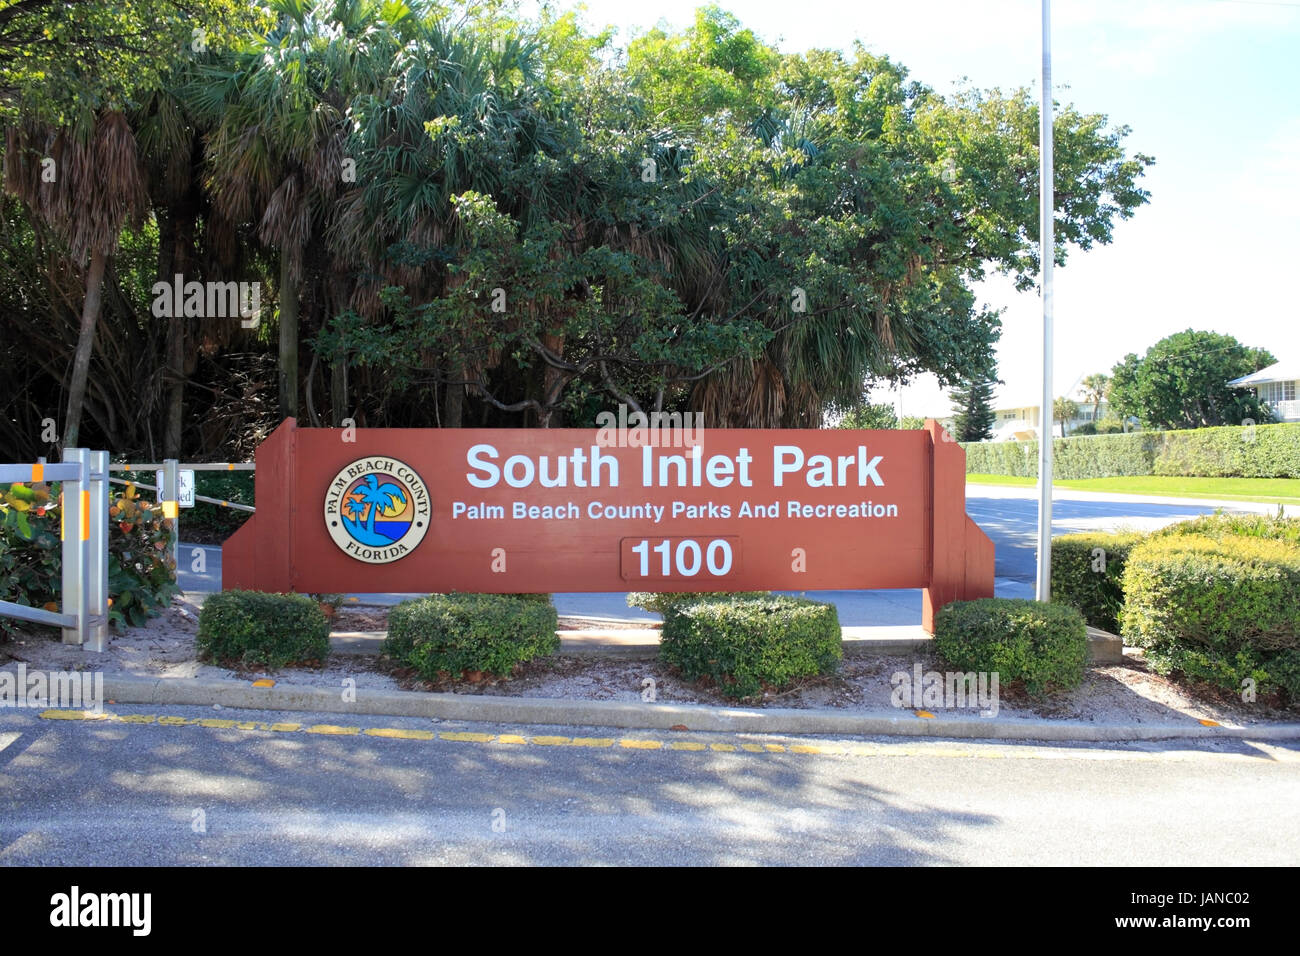 BOCA RATON, FLORIDA - FEBRUARY 1:  This park has 11.1 acres and amenities such as fishing, metered parking, picnic facilities, restrooms, outdoor showers on February 1, 2013 in Boca Raton, Florida. Stock Photo